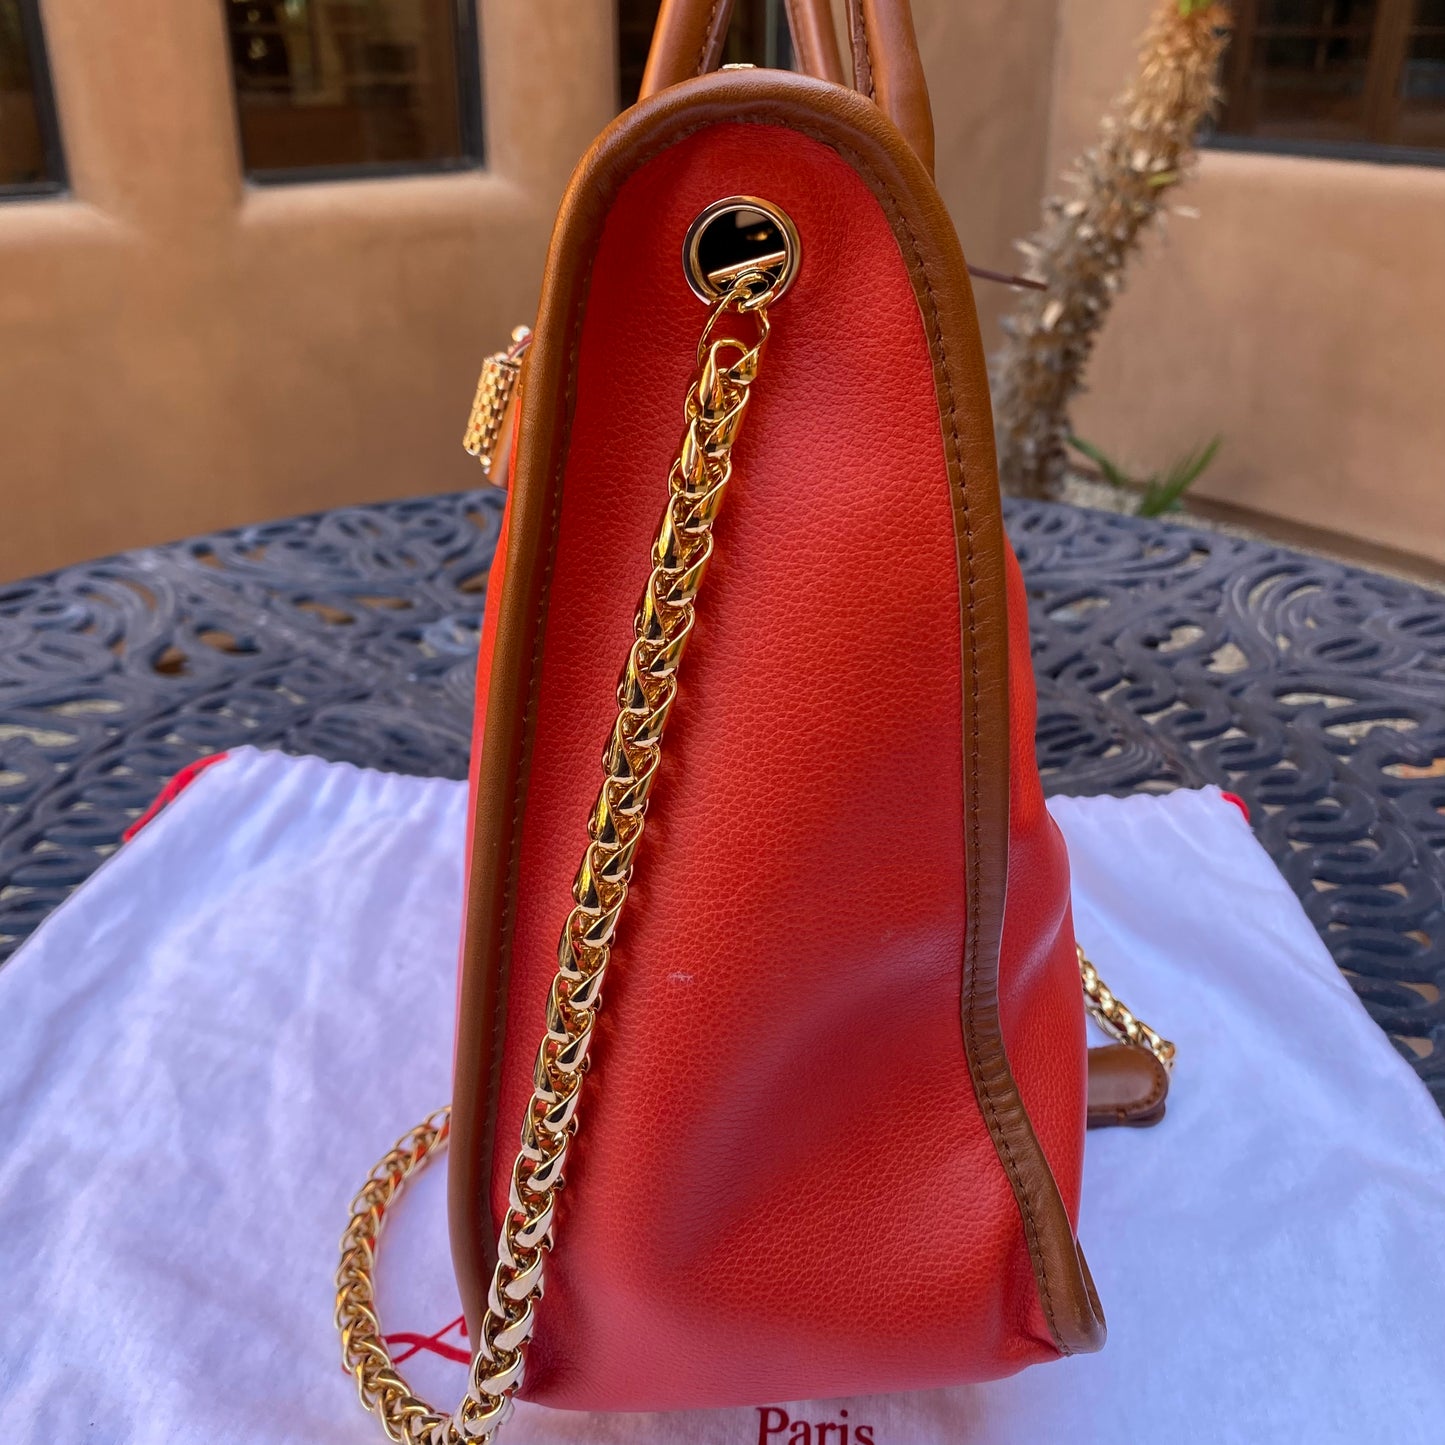 Christian Louboutin Sweet Charity Leather Shopping Tote